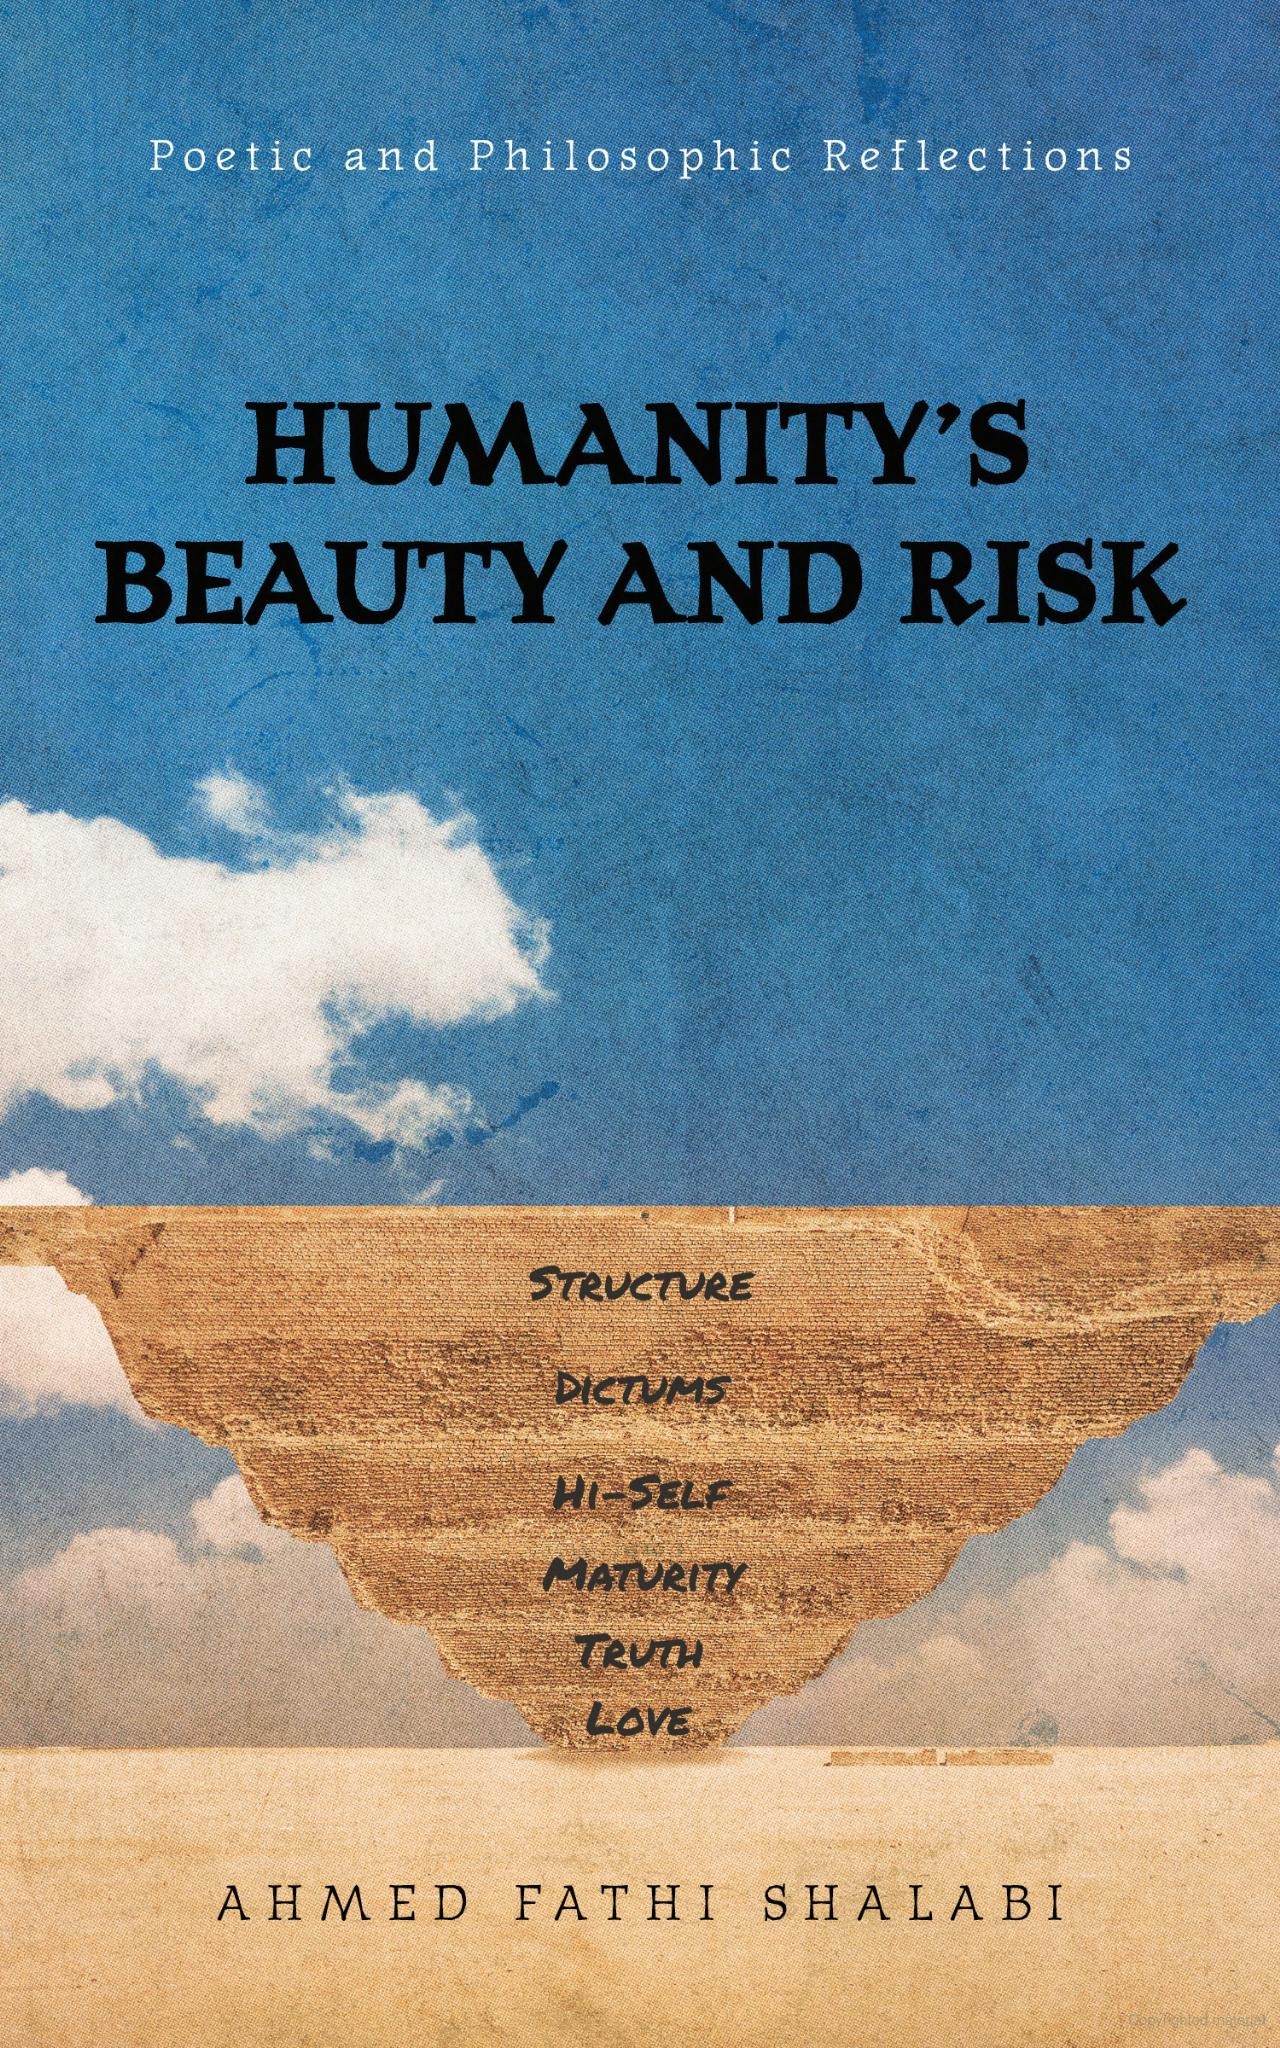 The book cover of Humanity's Beauty and Risk by Ahmed Fathi Shalabi